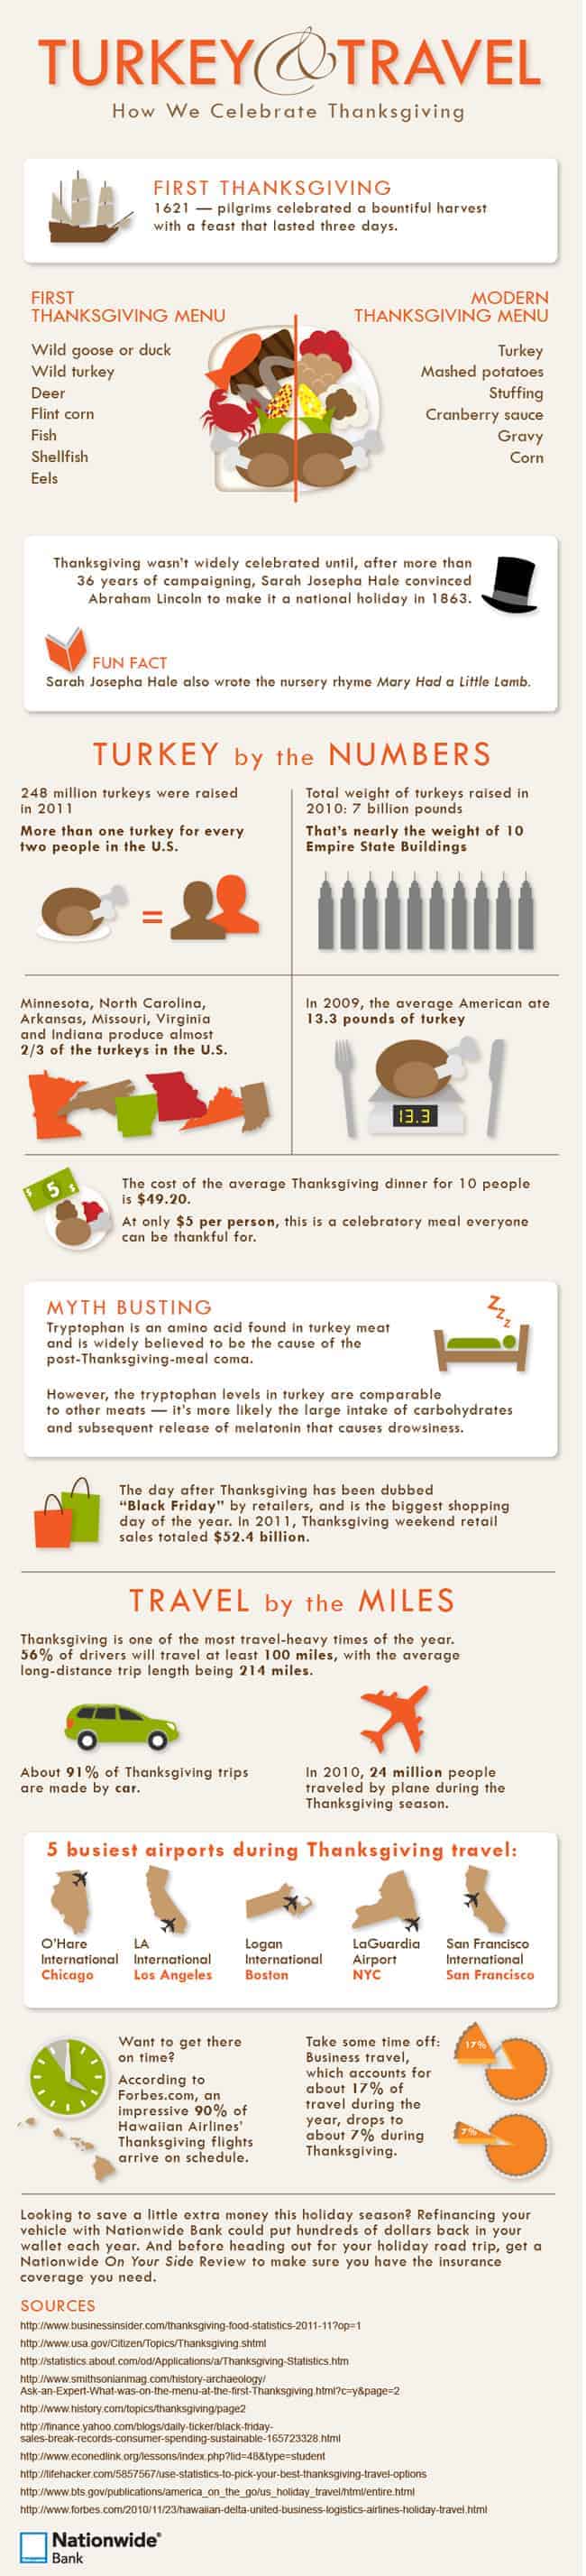 Turkey & Travel: How We Celebrate Thanksgiving [Infographic]